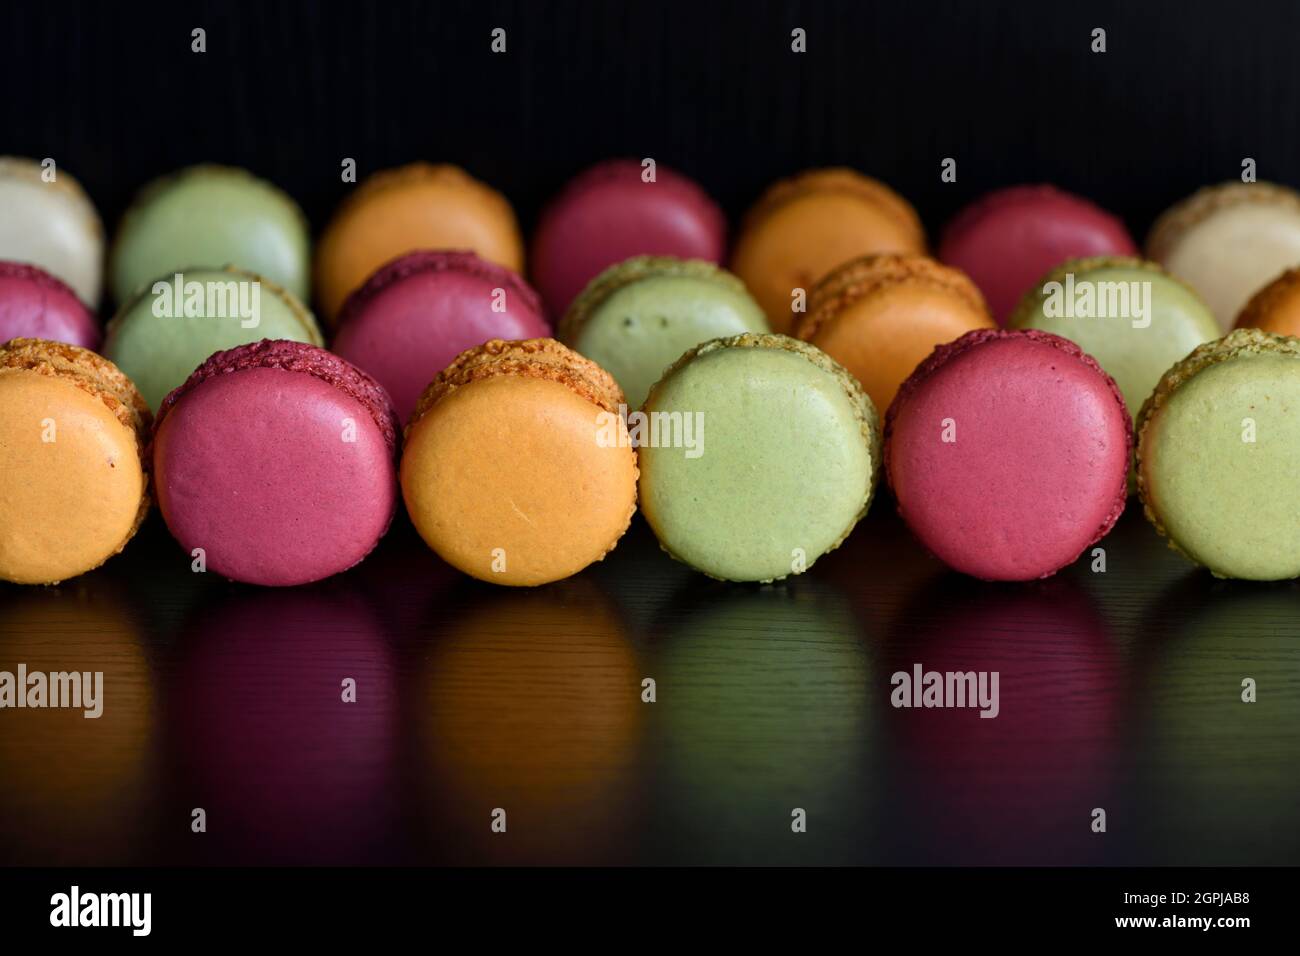 Macaron or French Macaroons a dessert cookie made from meringue and almond reflected on a black table Stock Photo